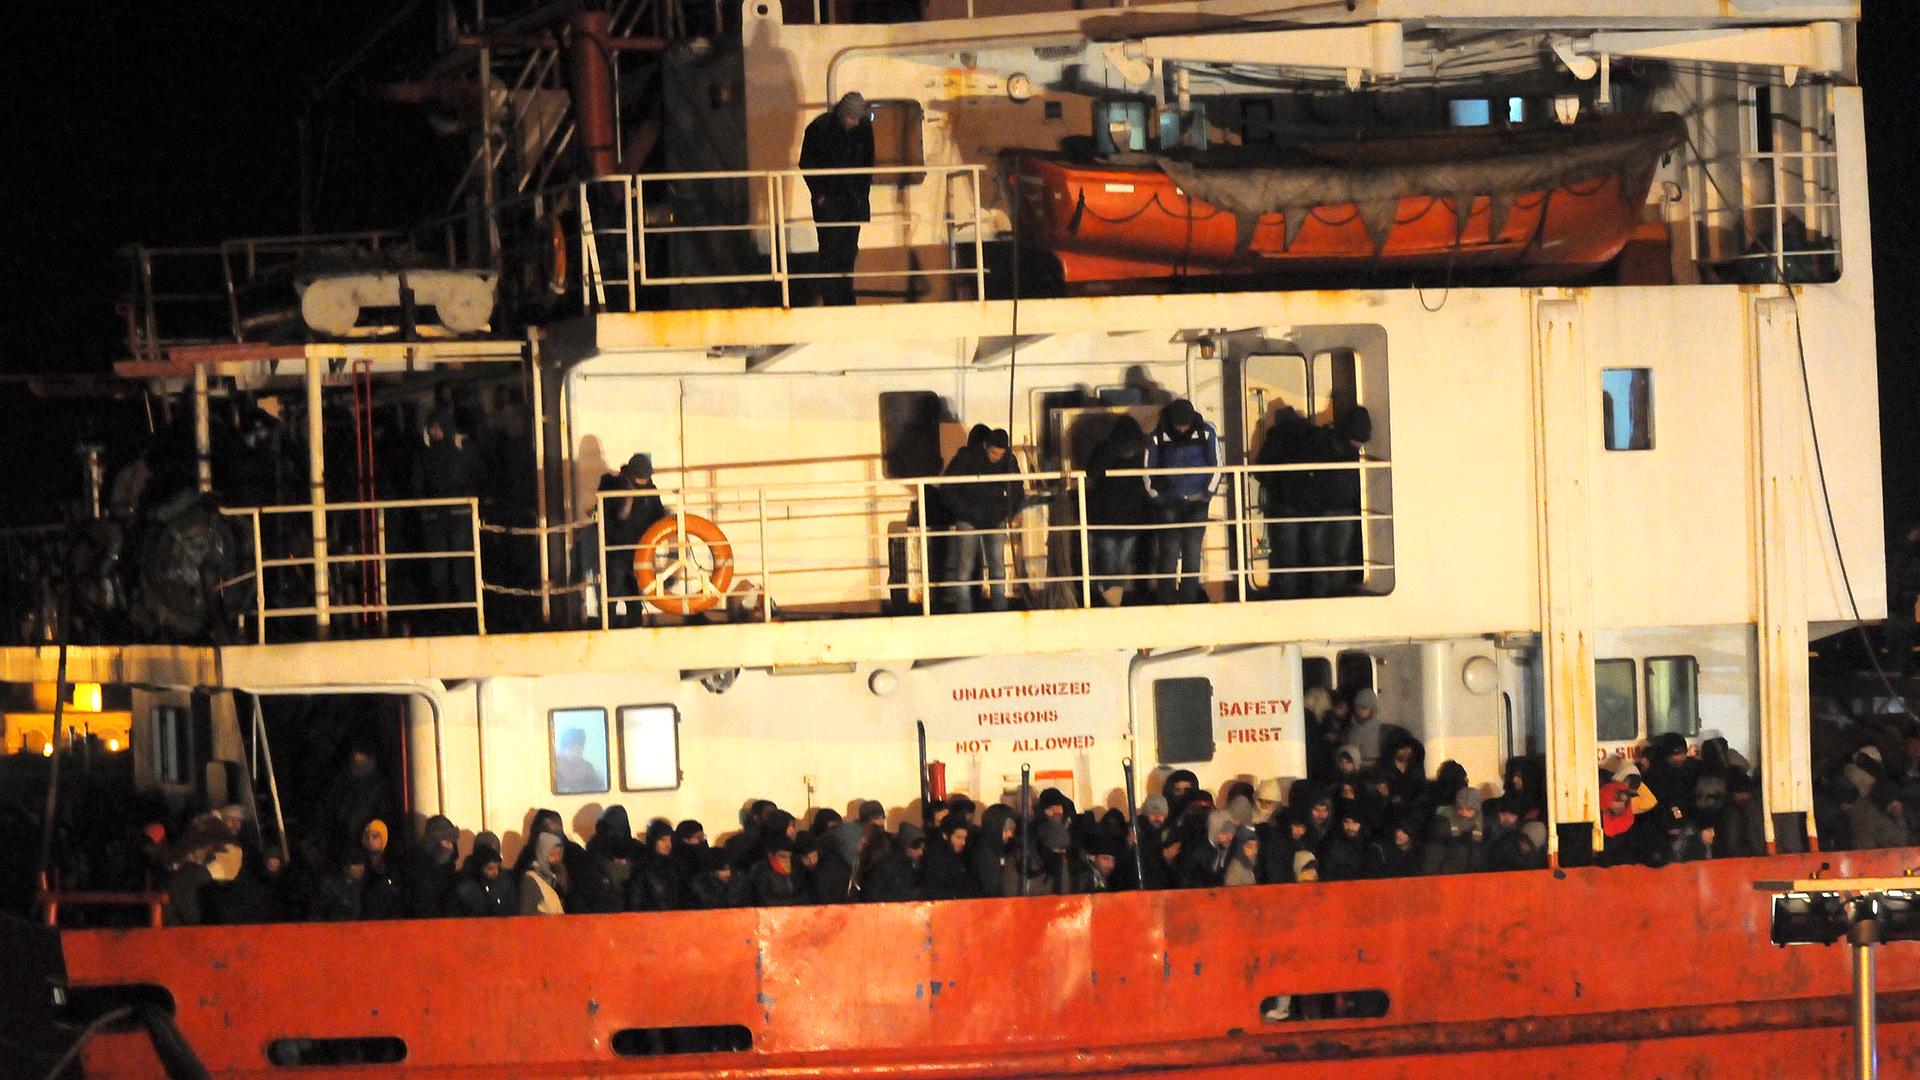 A ship called Blue Sky M docking in southern Italy on New Year’s Eve 2014 after being rescued. Locals interrupted their celebrations to help the hundreds of freezing refugees on board.